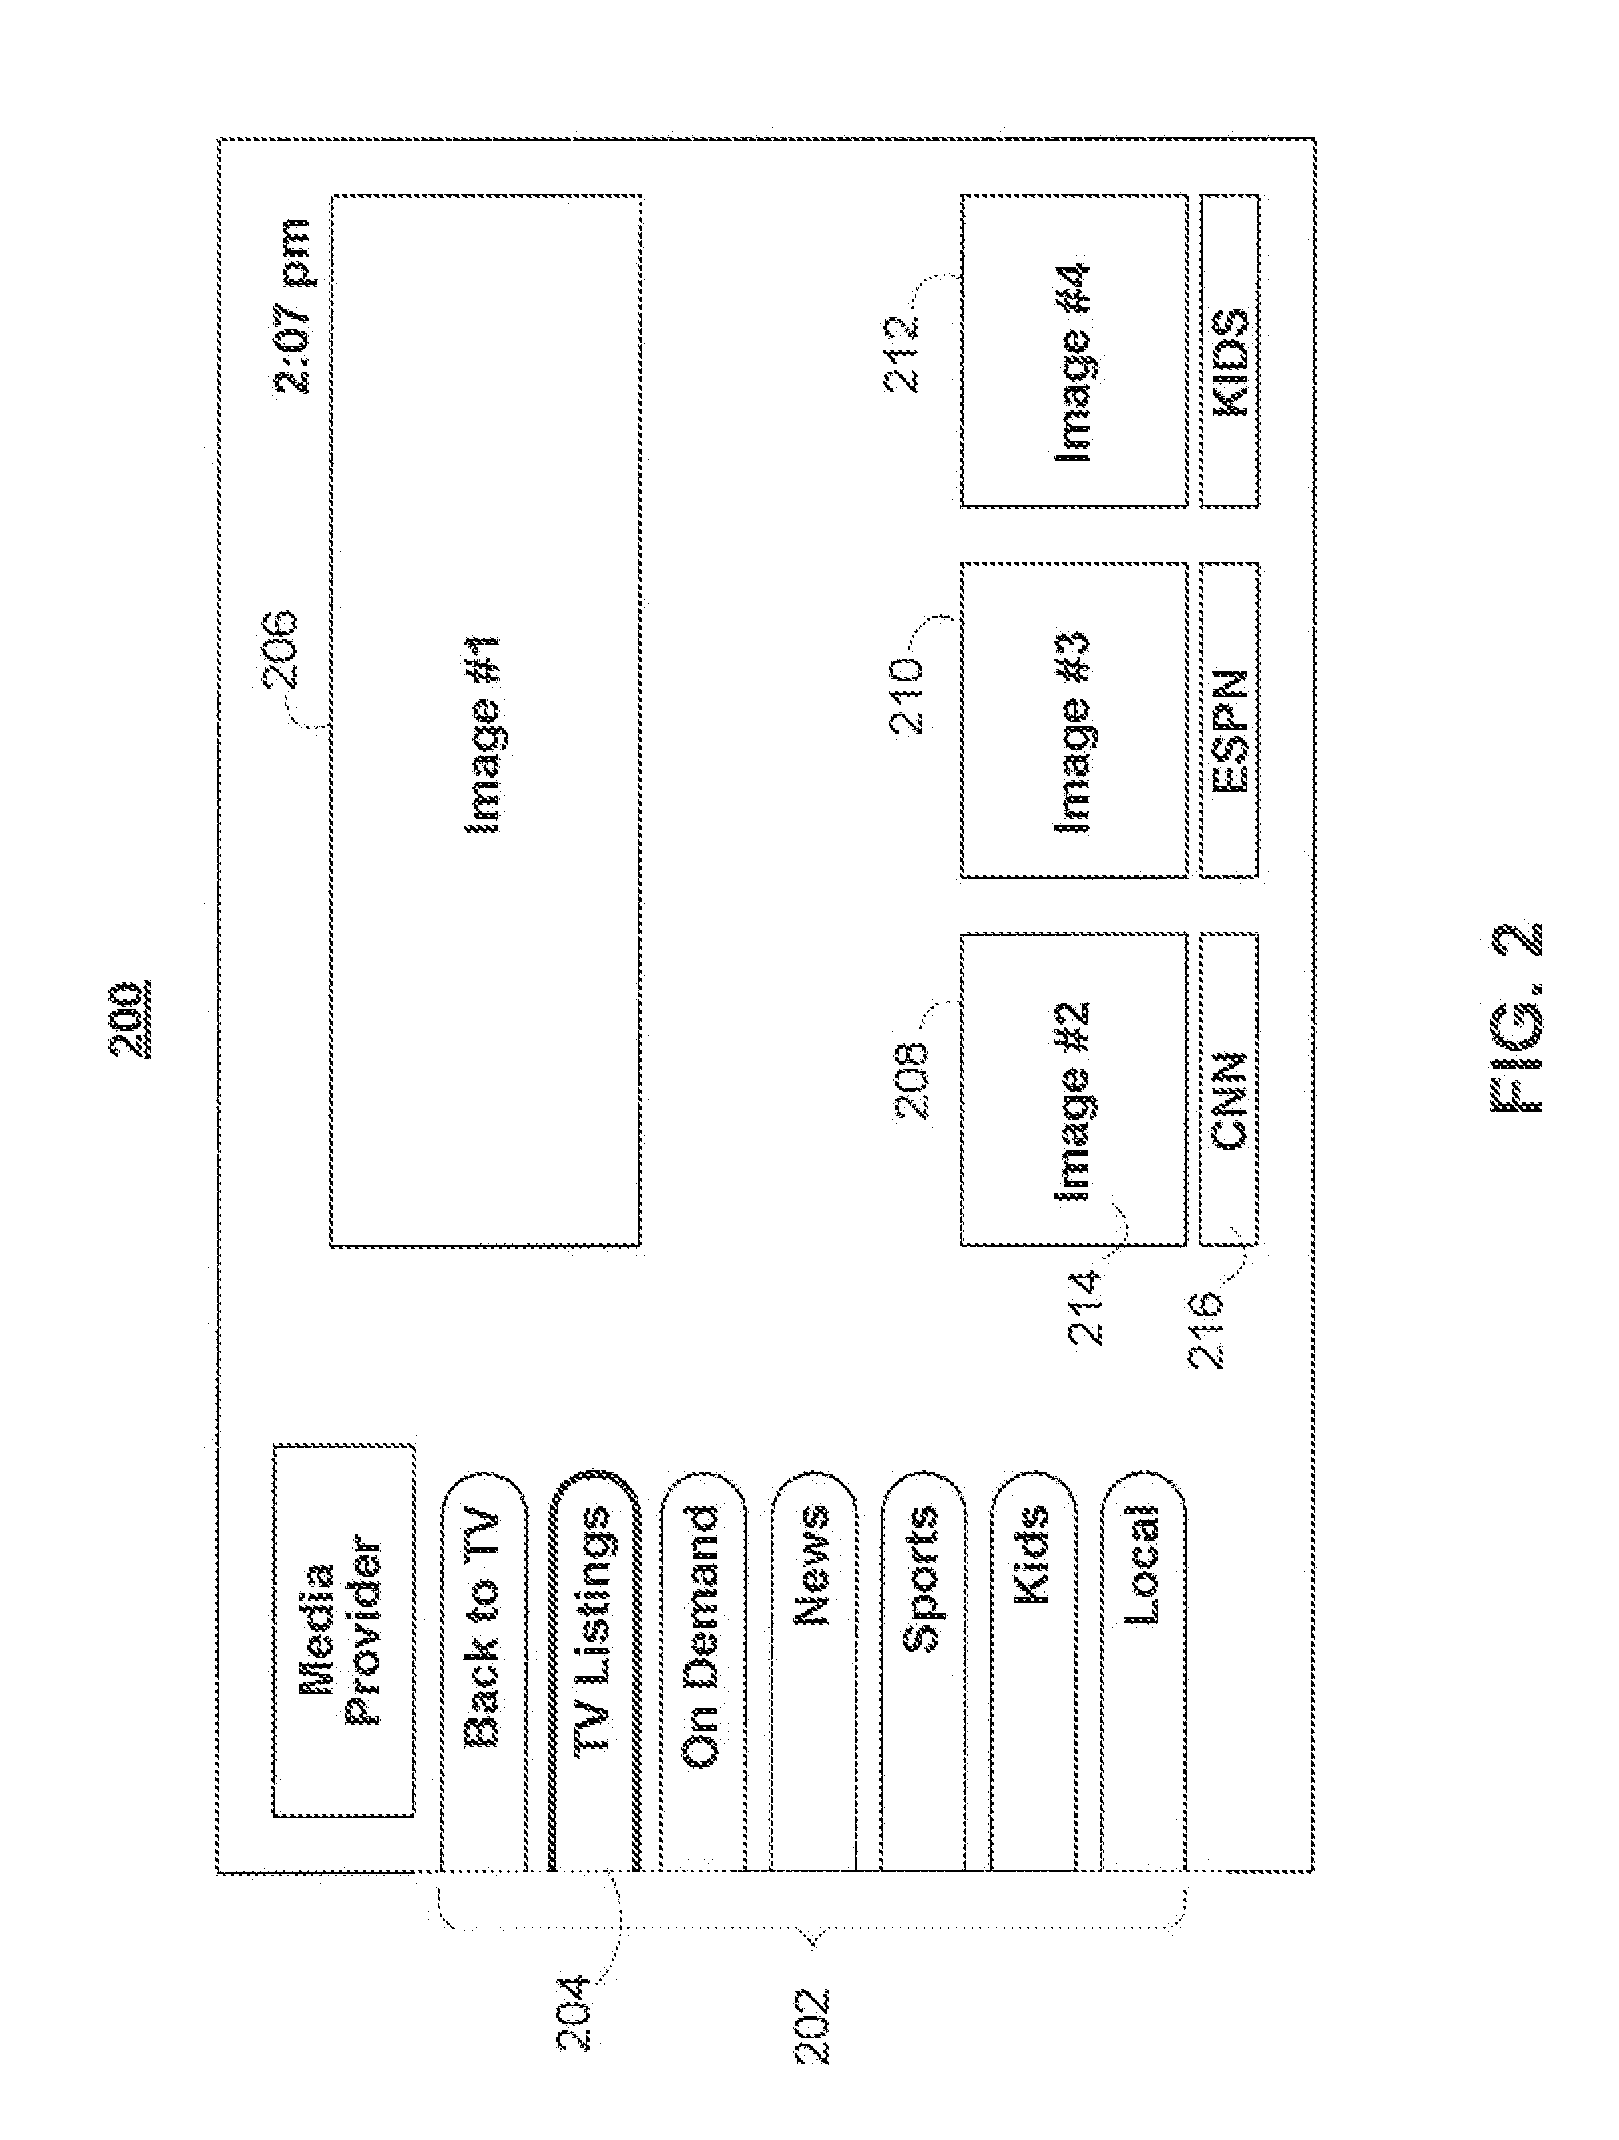 Systems and methods for simulating dialog between a user and media equipment device